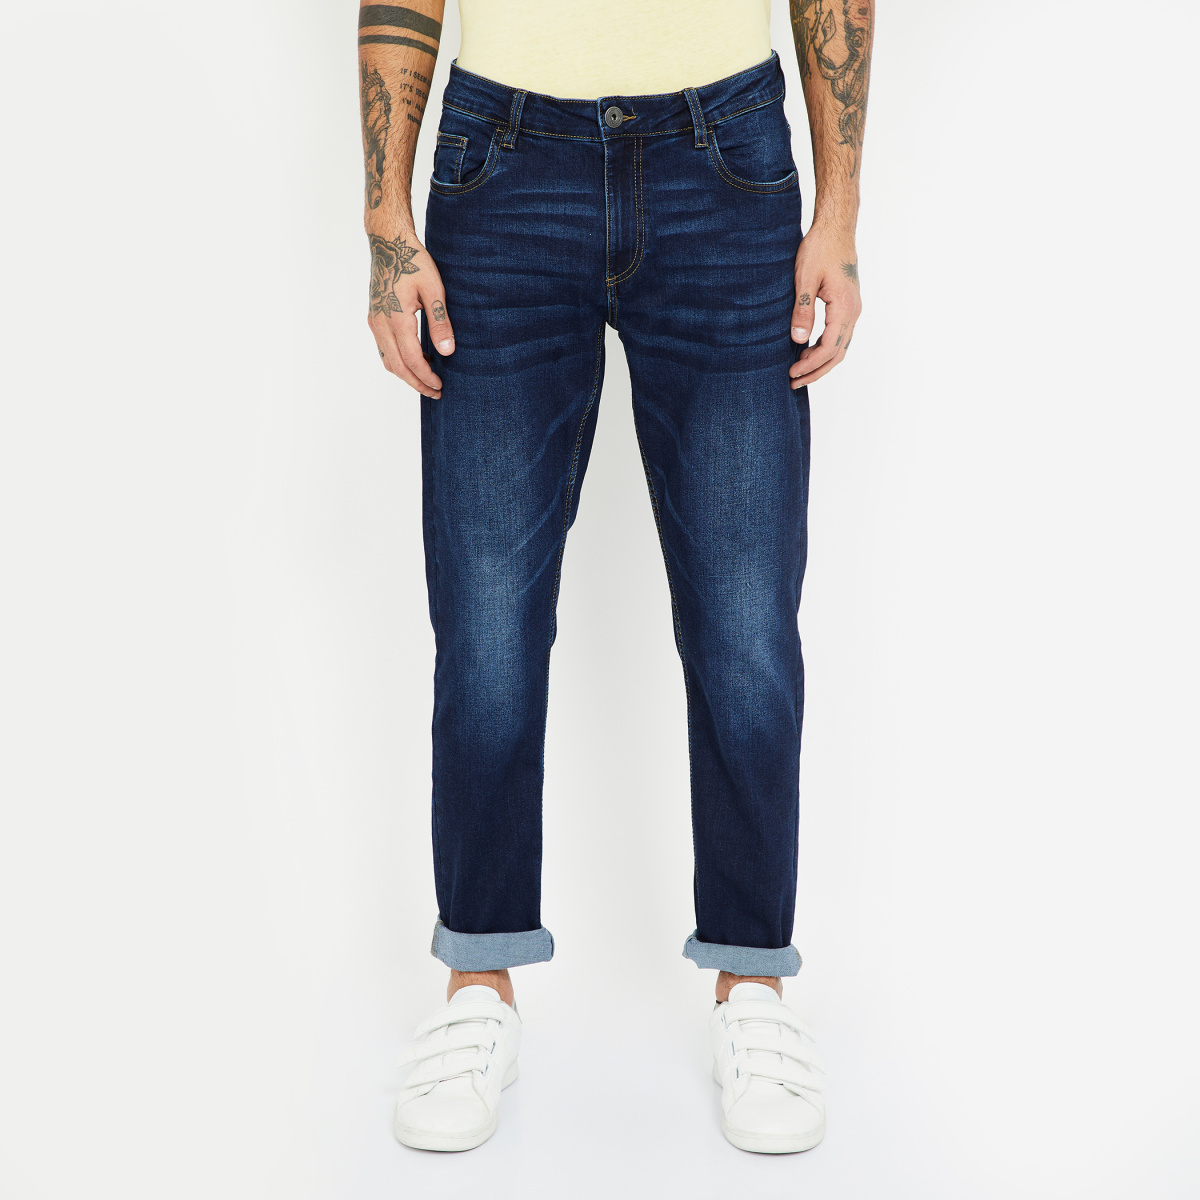 FORCA Dark Washed Slim Fit Jeans